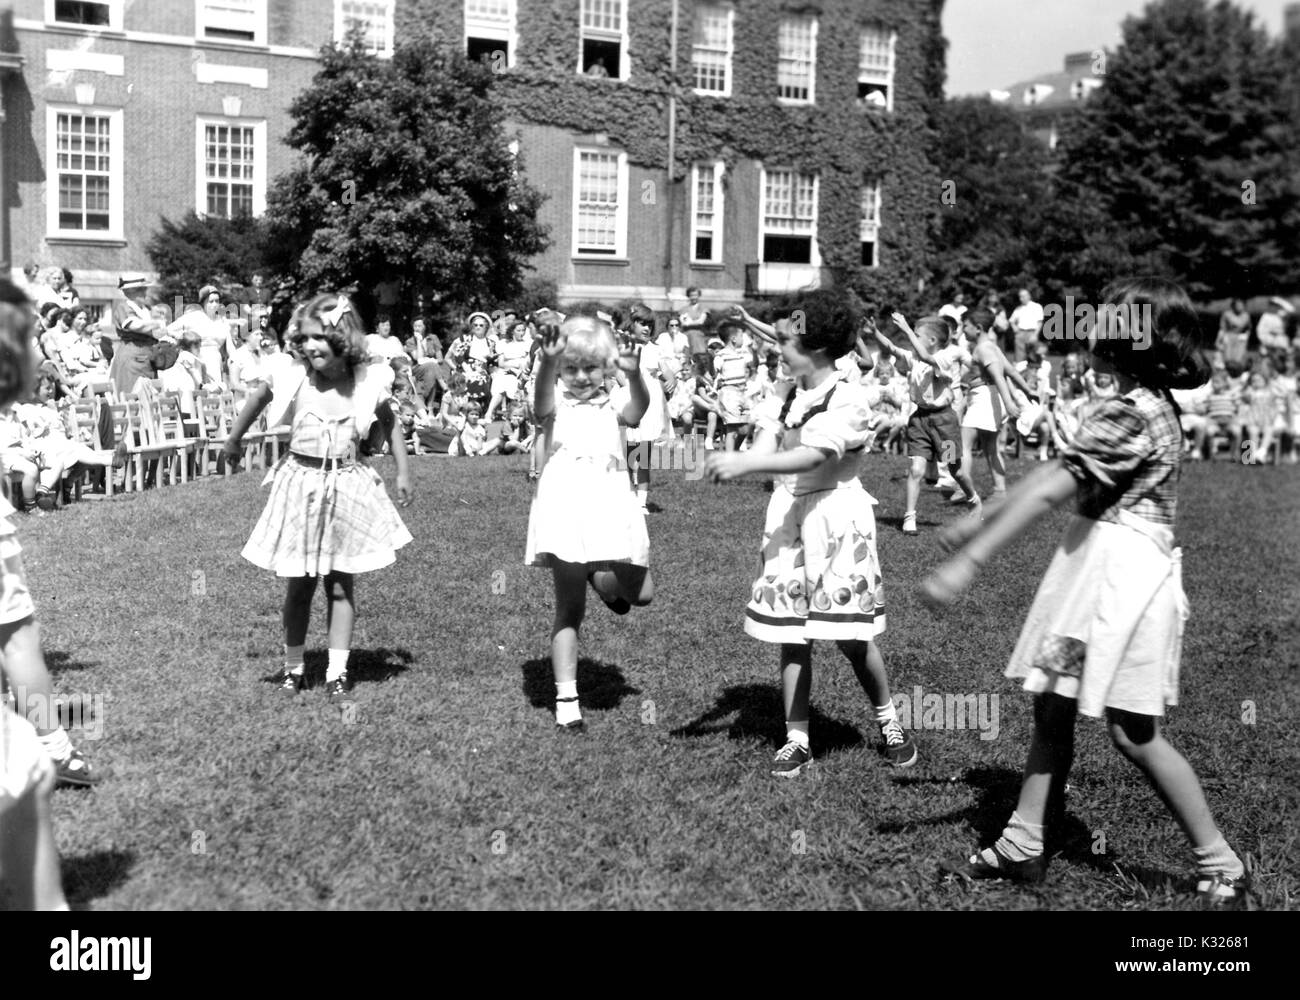 At the end of the school year for a demonstration school at Johns Hopkins University, young boys and girls put on a show in the grass on a sunny day, happily skipping and waving their hands in front of an audience made up of classmates, teachers, and parents sitting and standing outside of an ivy-covered campus building, Baltimore, Maryland, July, 1950. Stock Photo